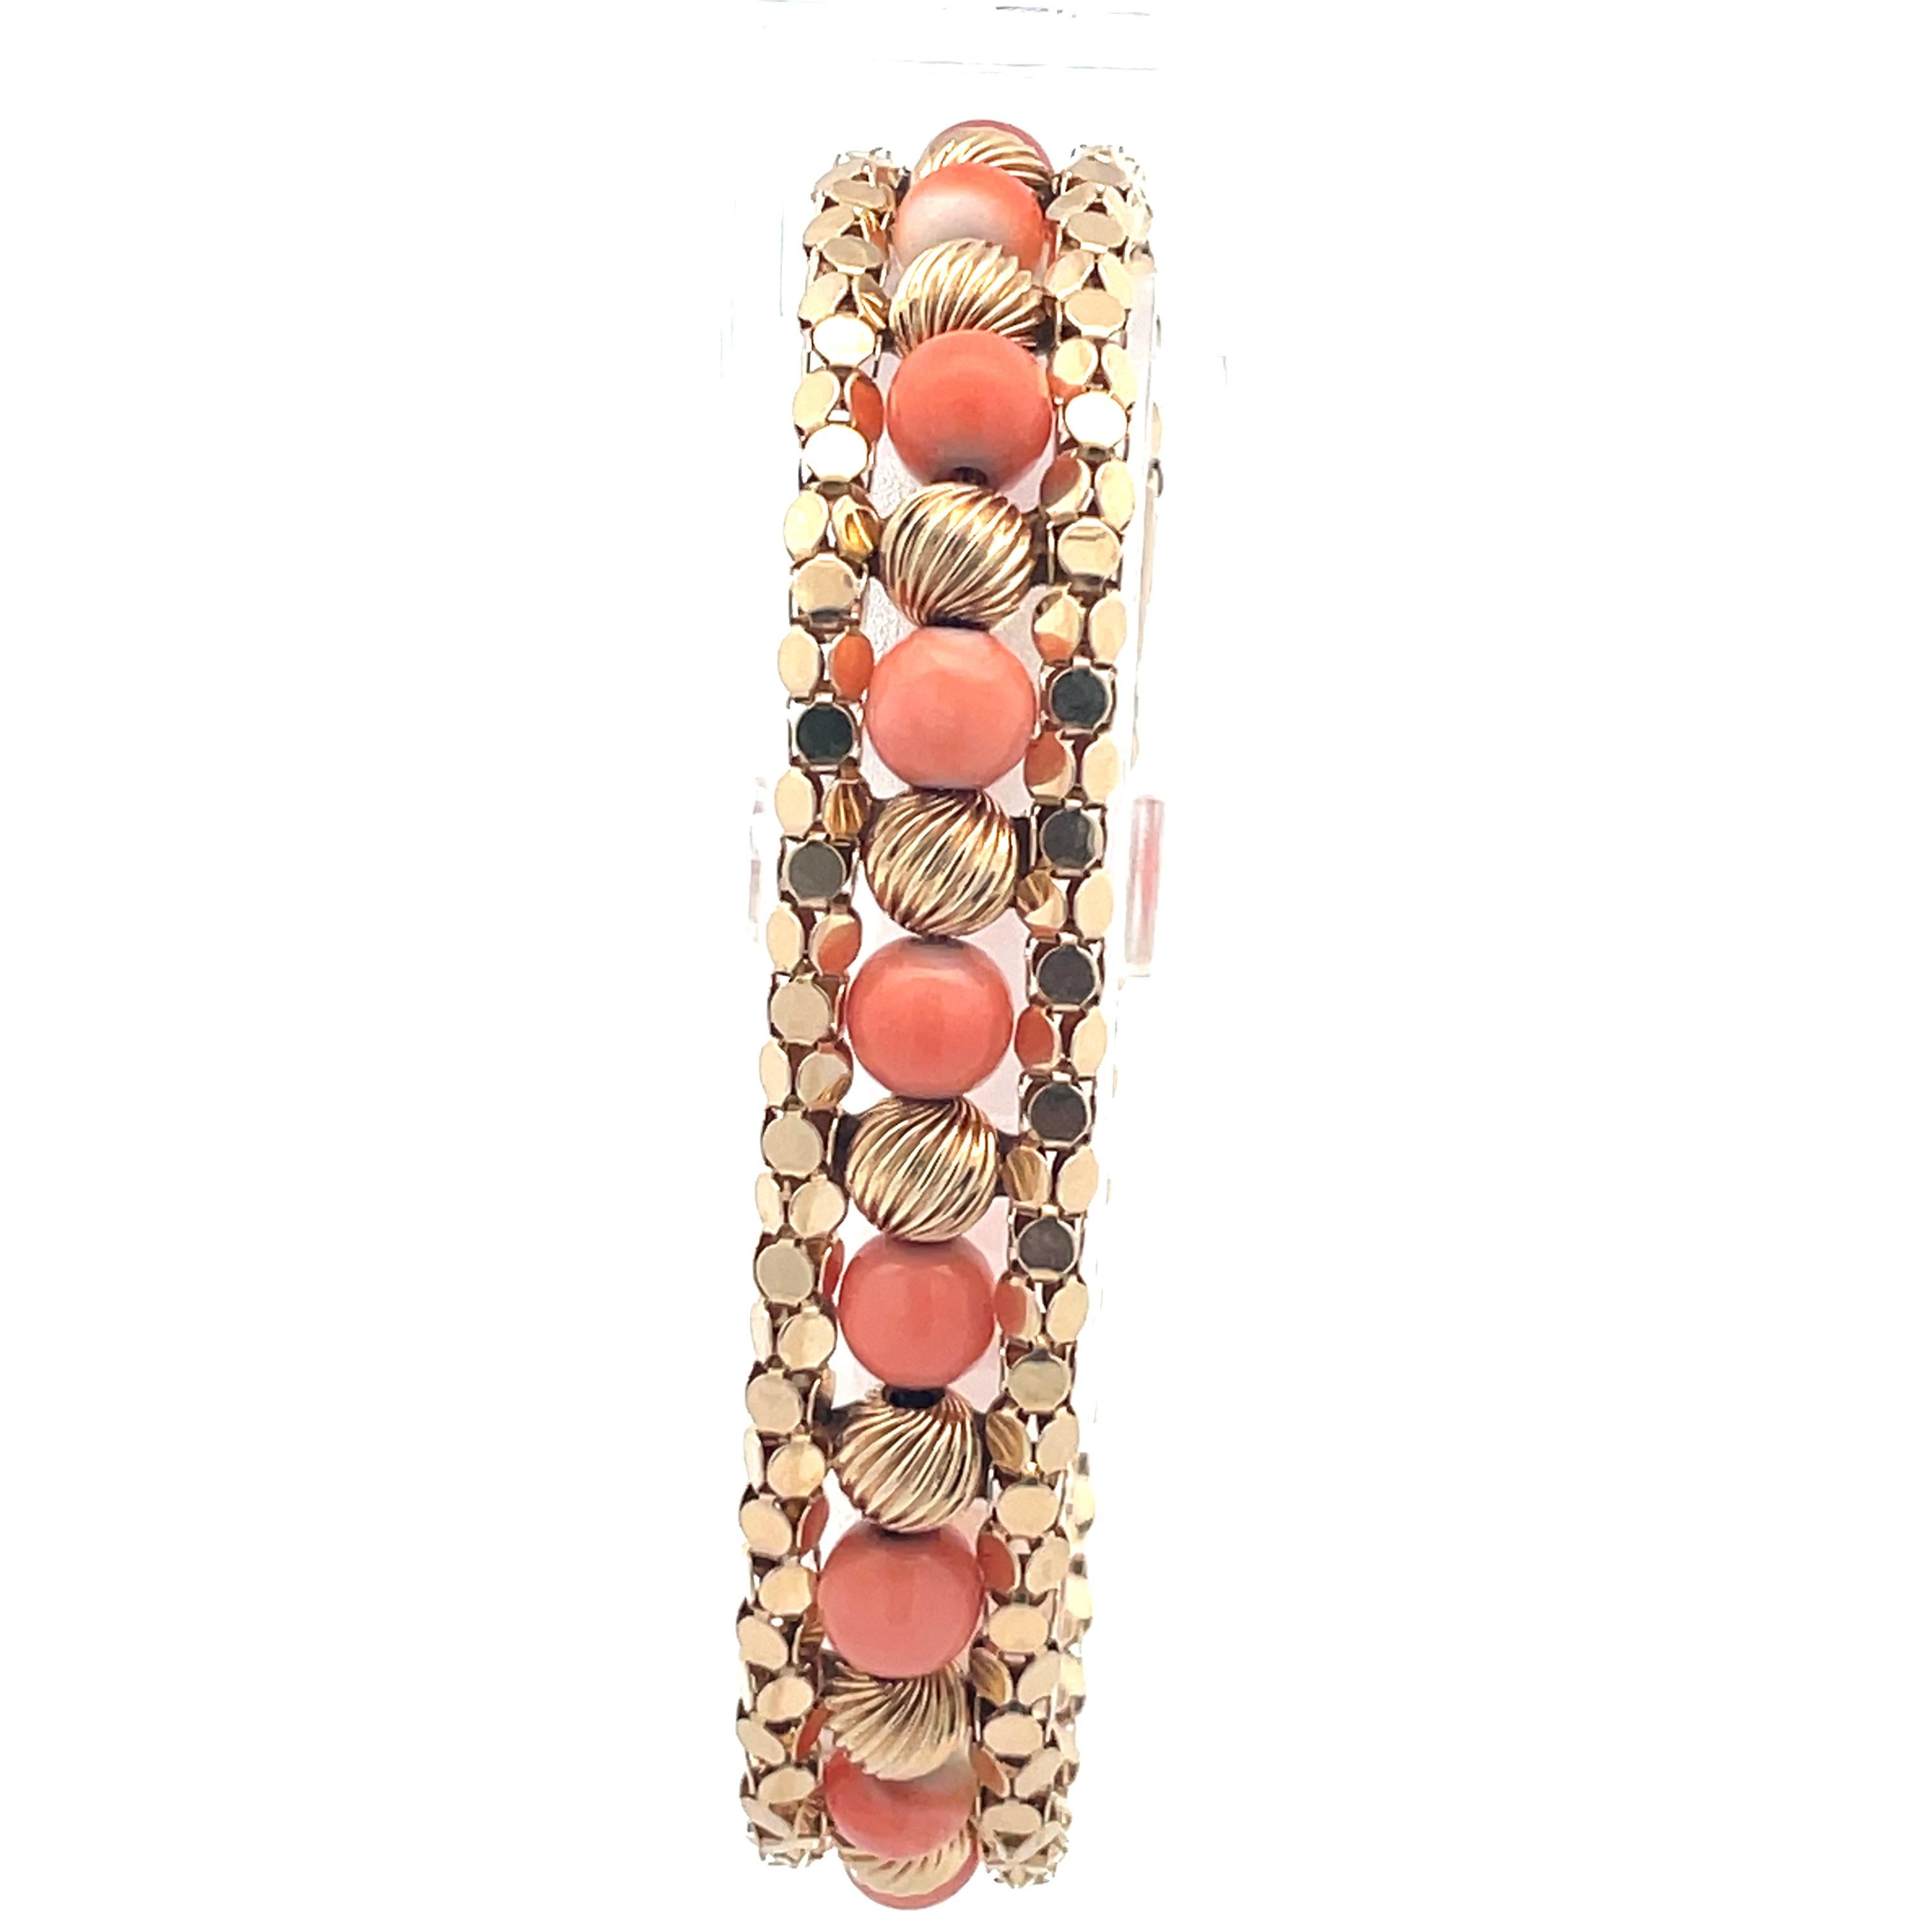 This 7.5” natural coral and 14k yellow gold bracelet is a truly stunning wearable piece of art. The vibrant colors of the coral contrast beautifully with the round fluted gold beads stacked between them to create an elegant bracelet with a